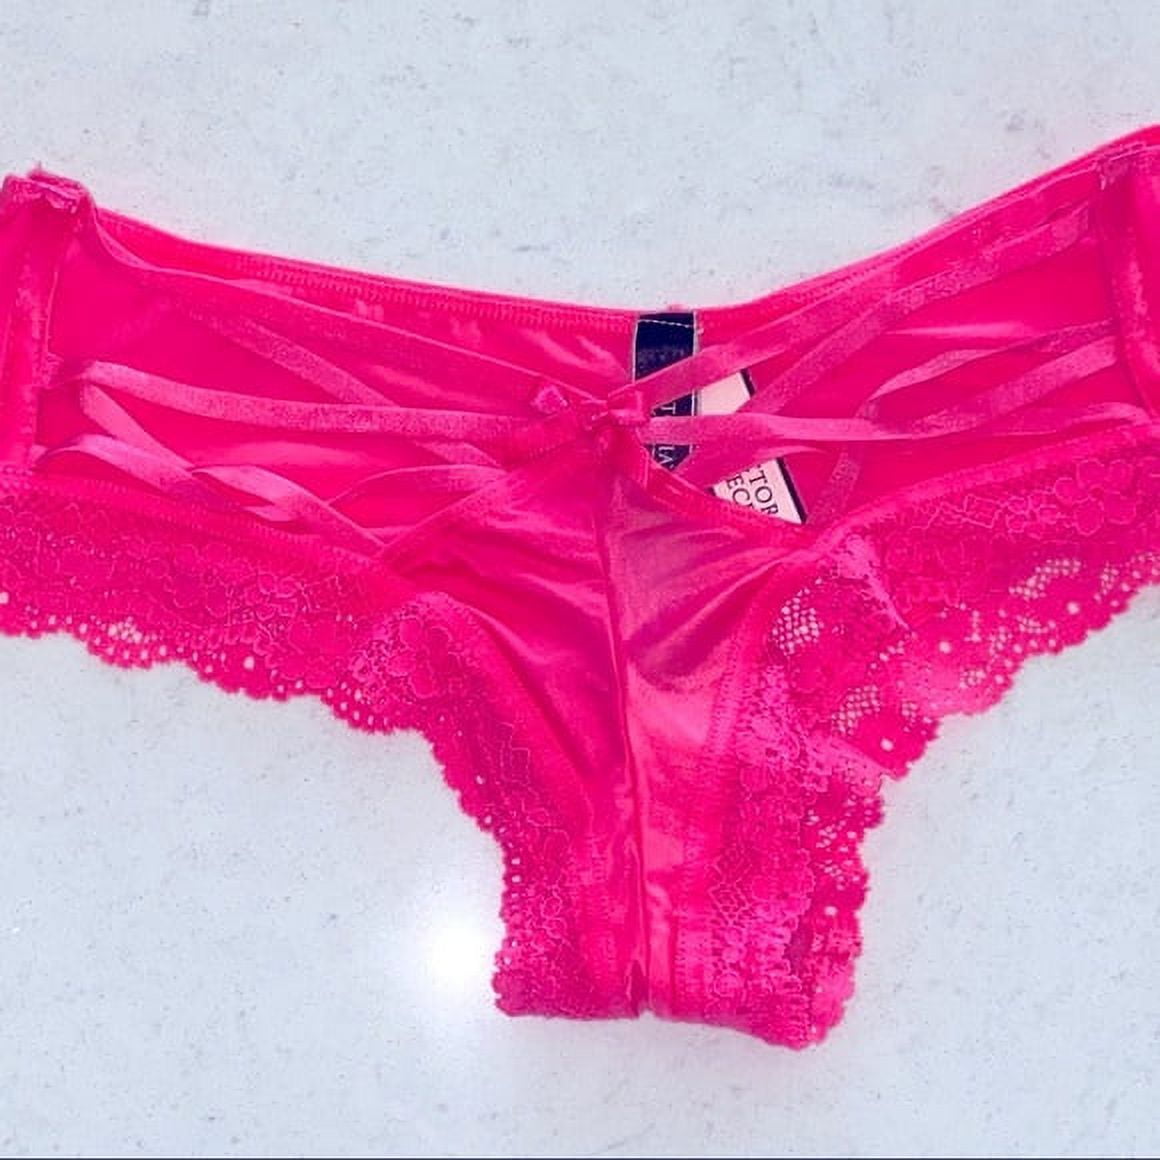 Victoria's Secret Very Sexy Cheeky Satin Lace Trim Pink Panty